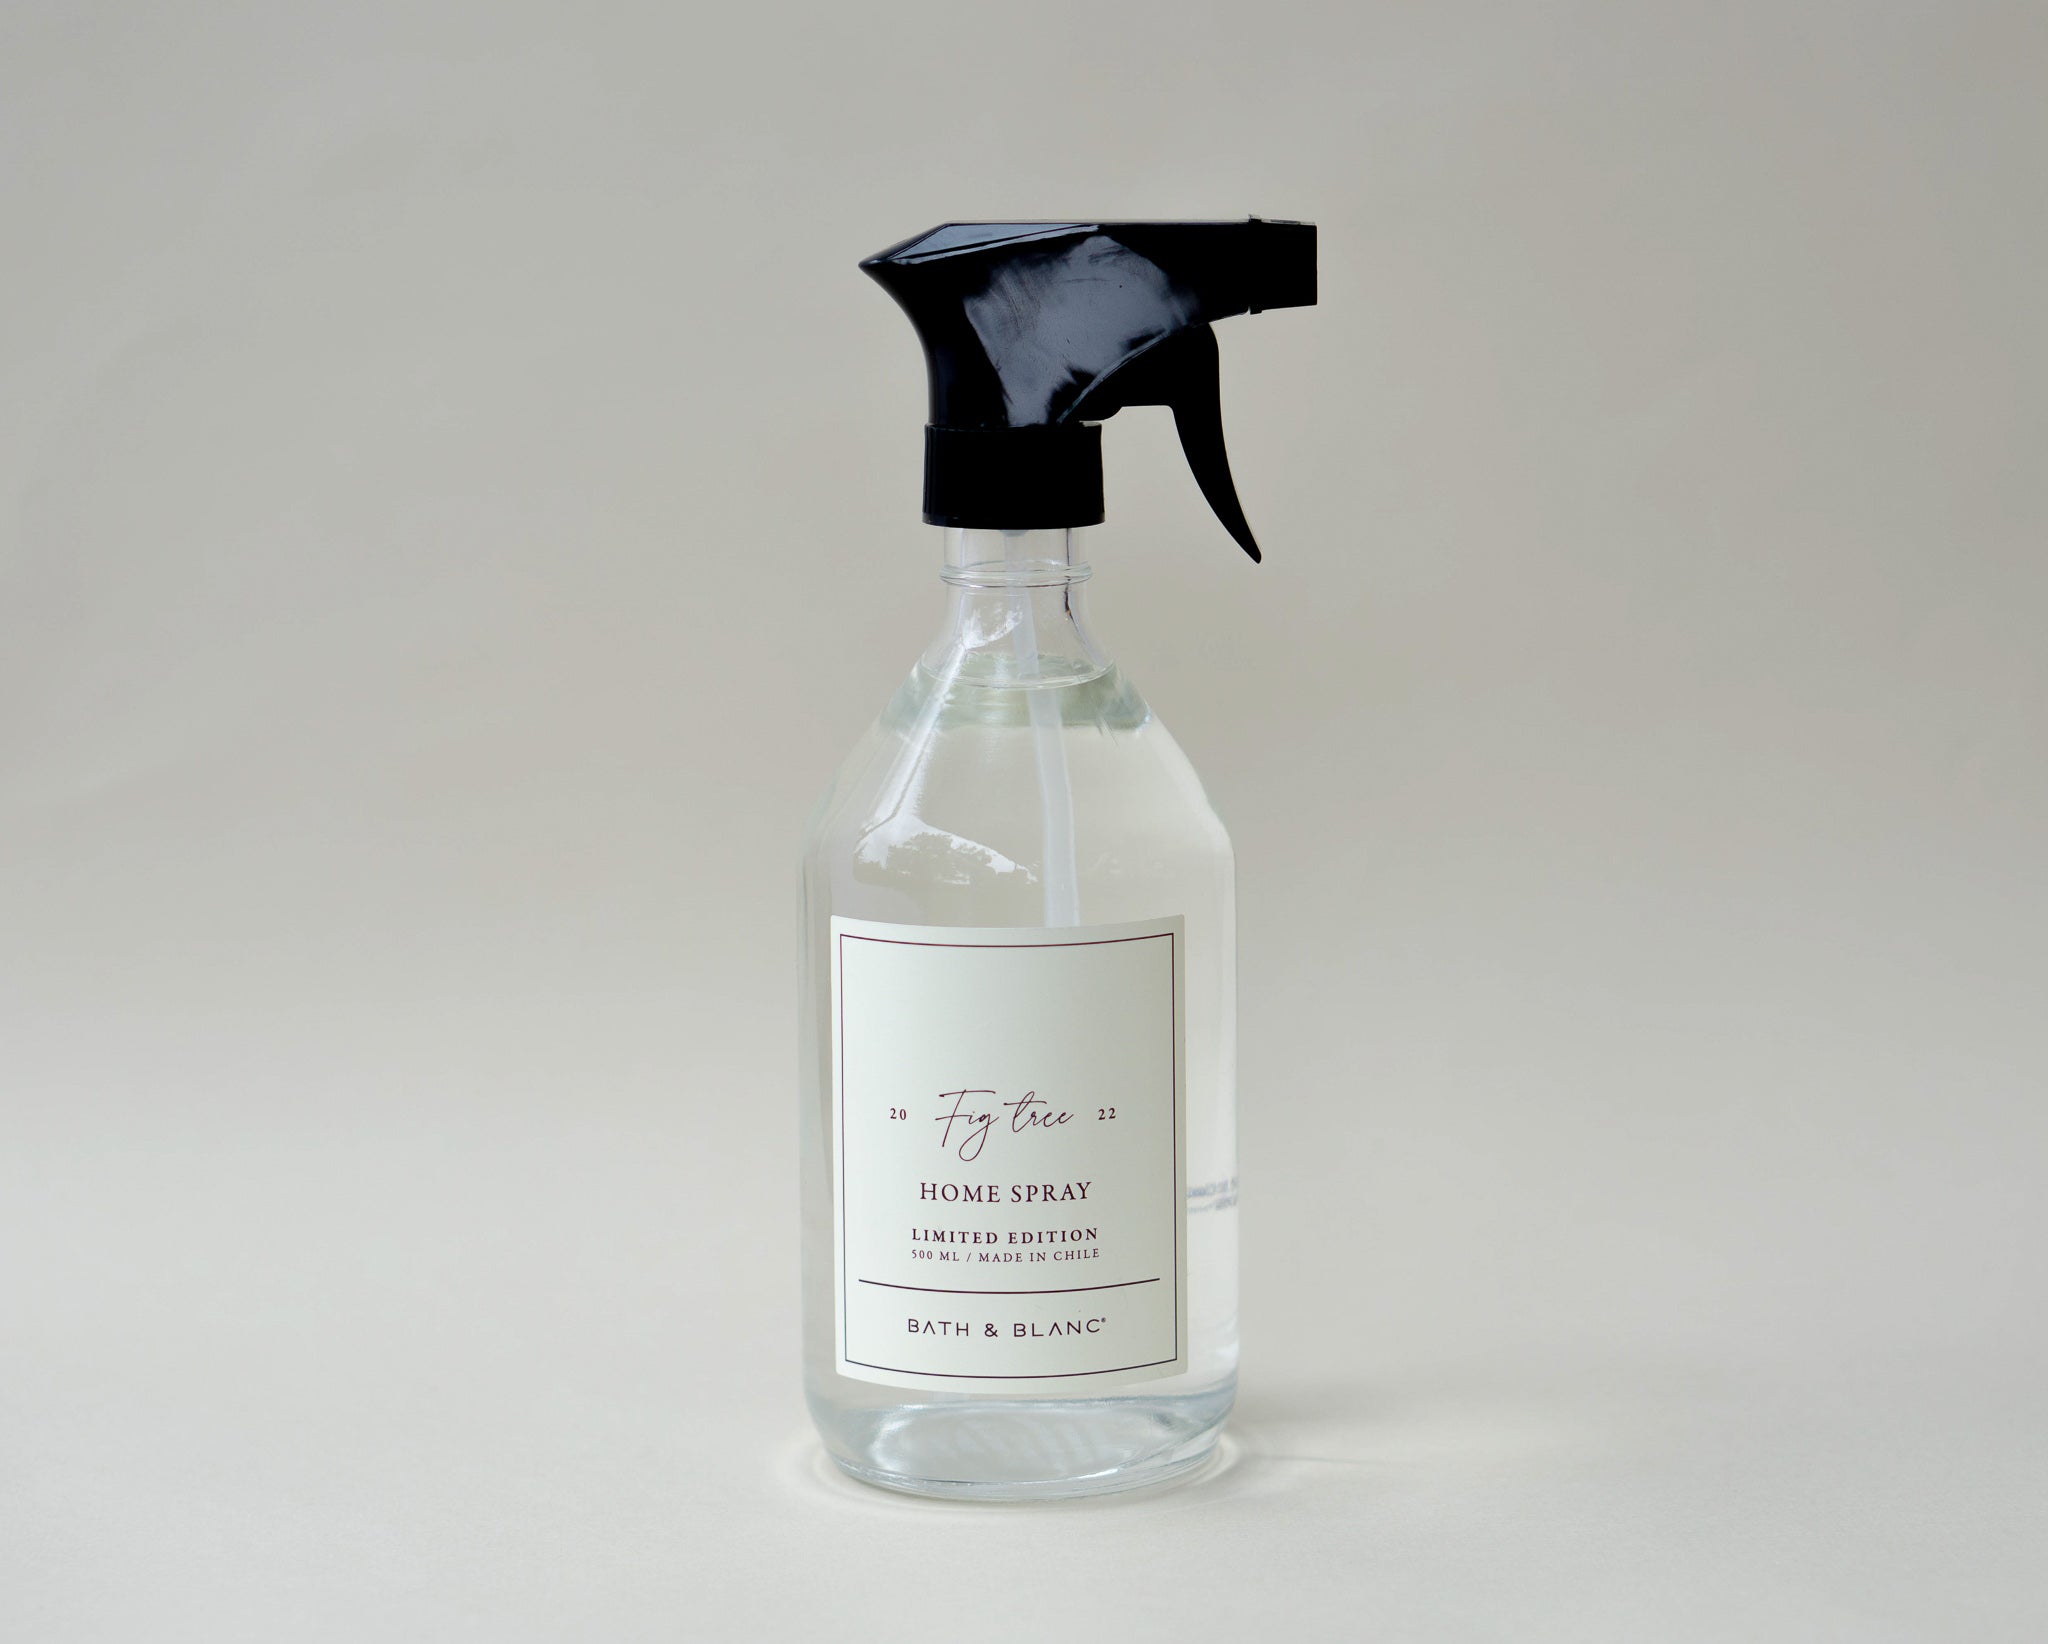 home spray limited edition vintage